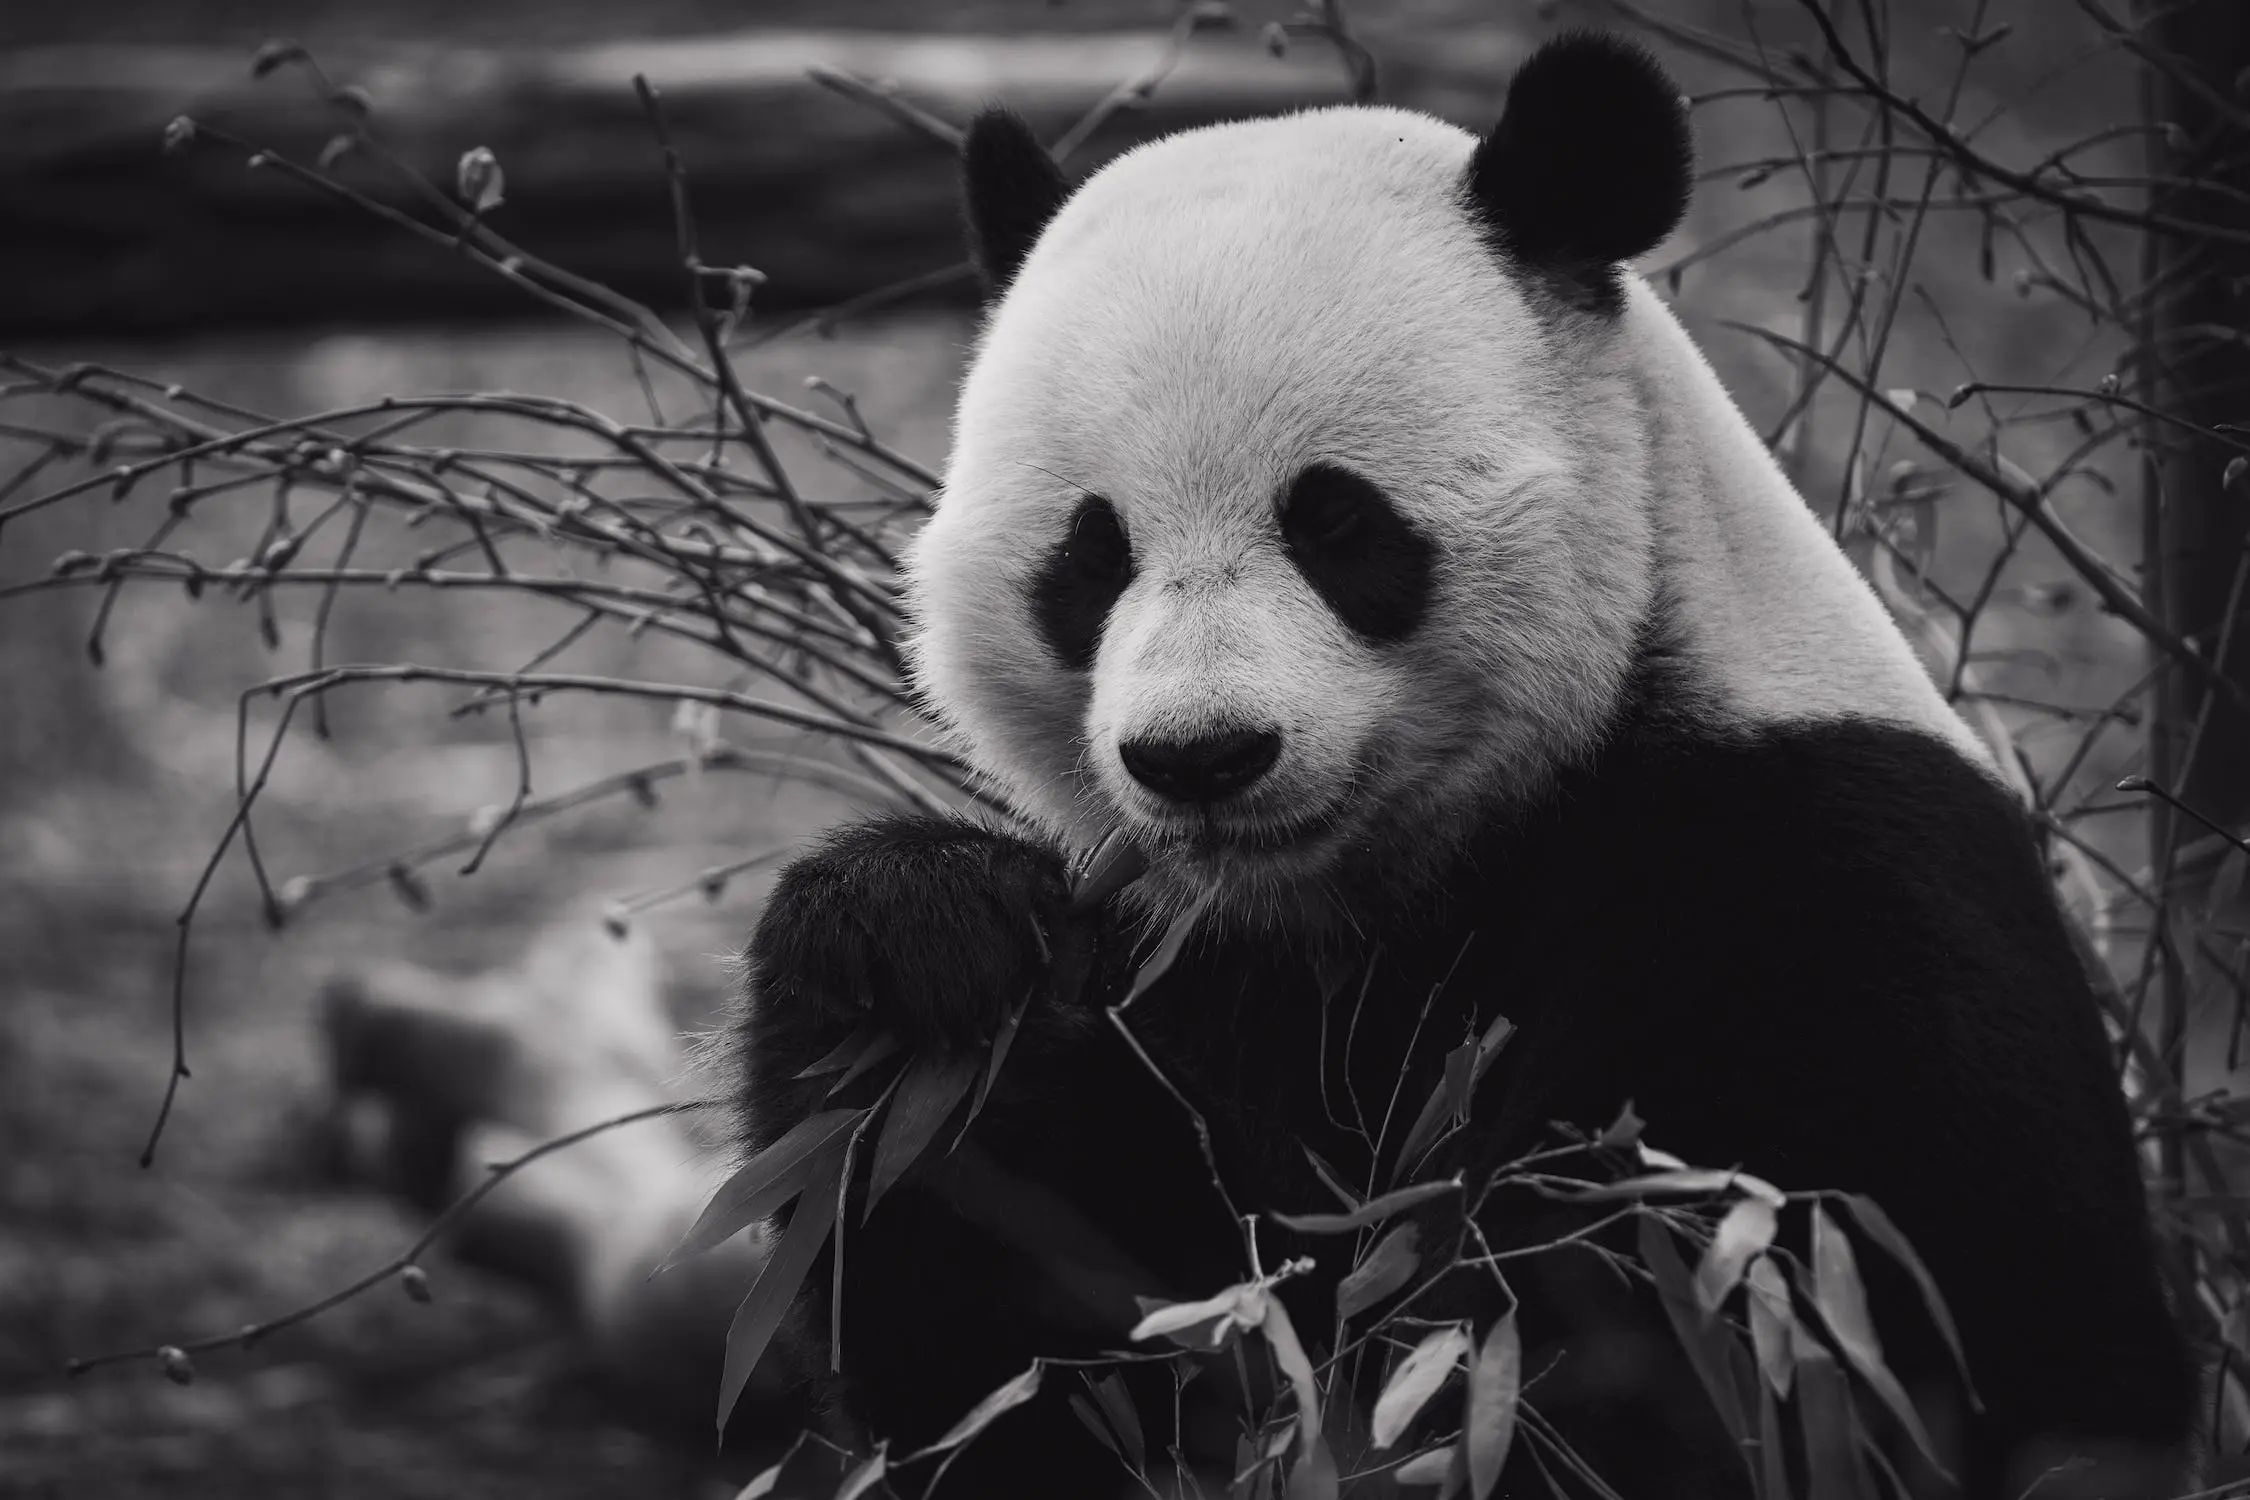 Farewell Nears for D.C.’s Beloved Pandas as They Return to China